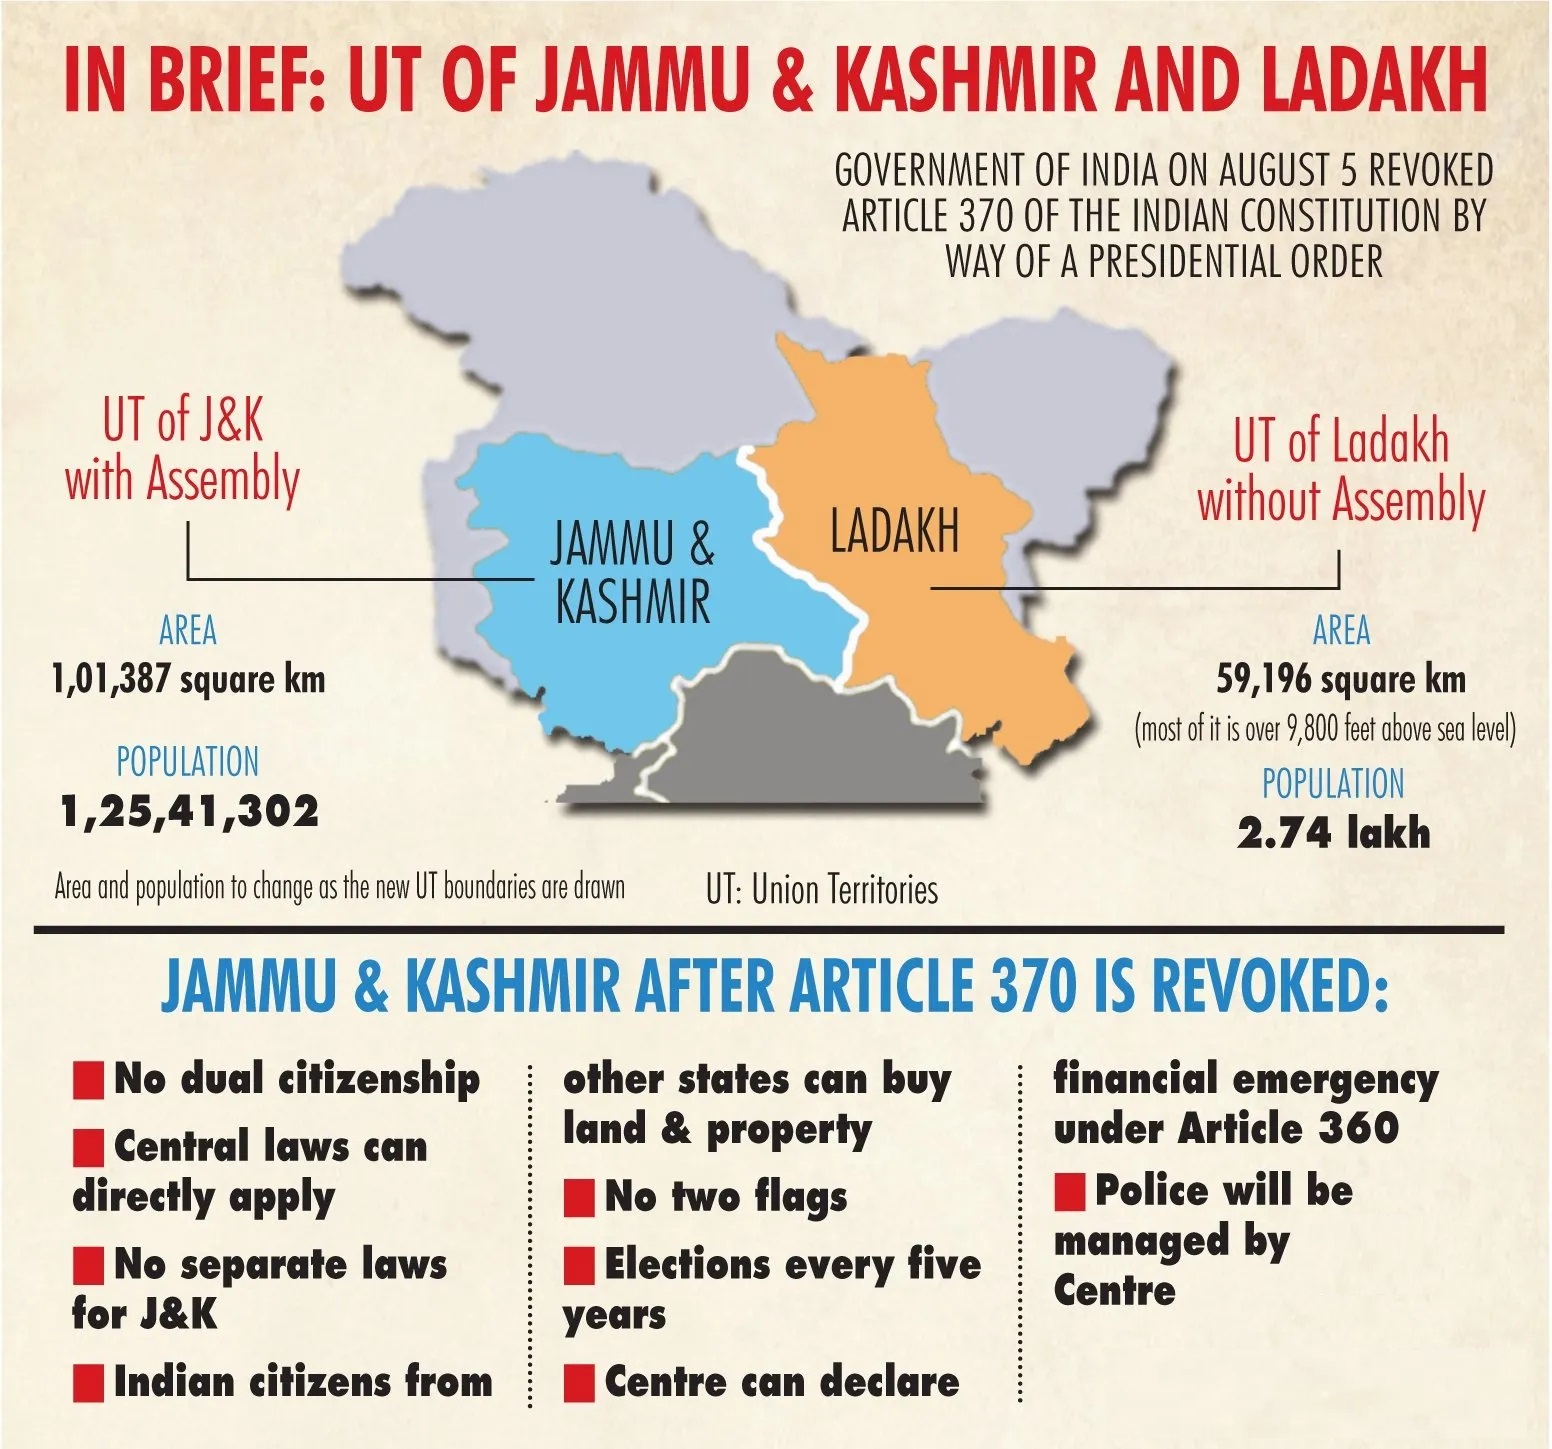 Amid Article 370 Debate, China Renews Assertions of Historical Rights in Ladakh Region